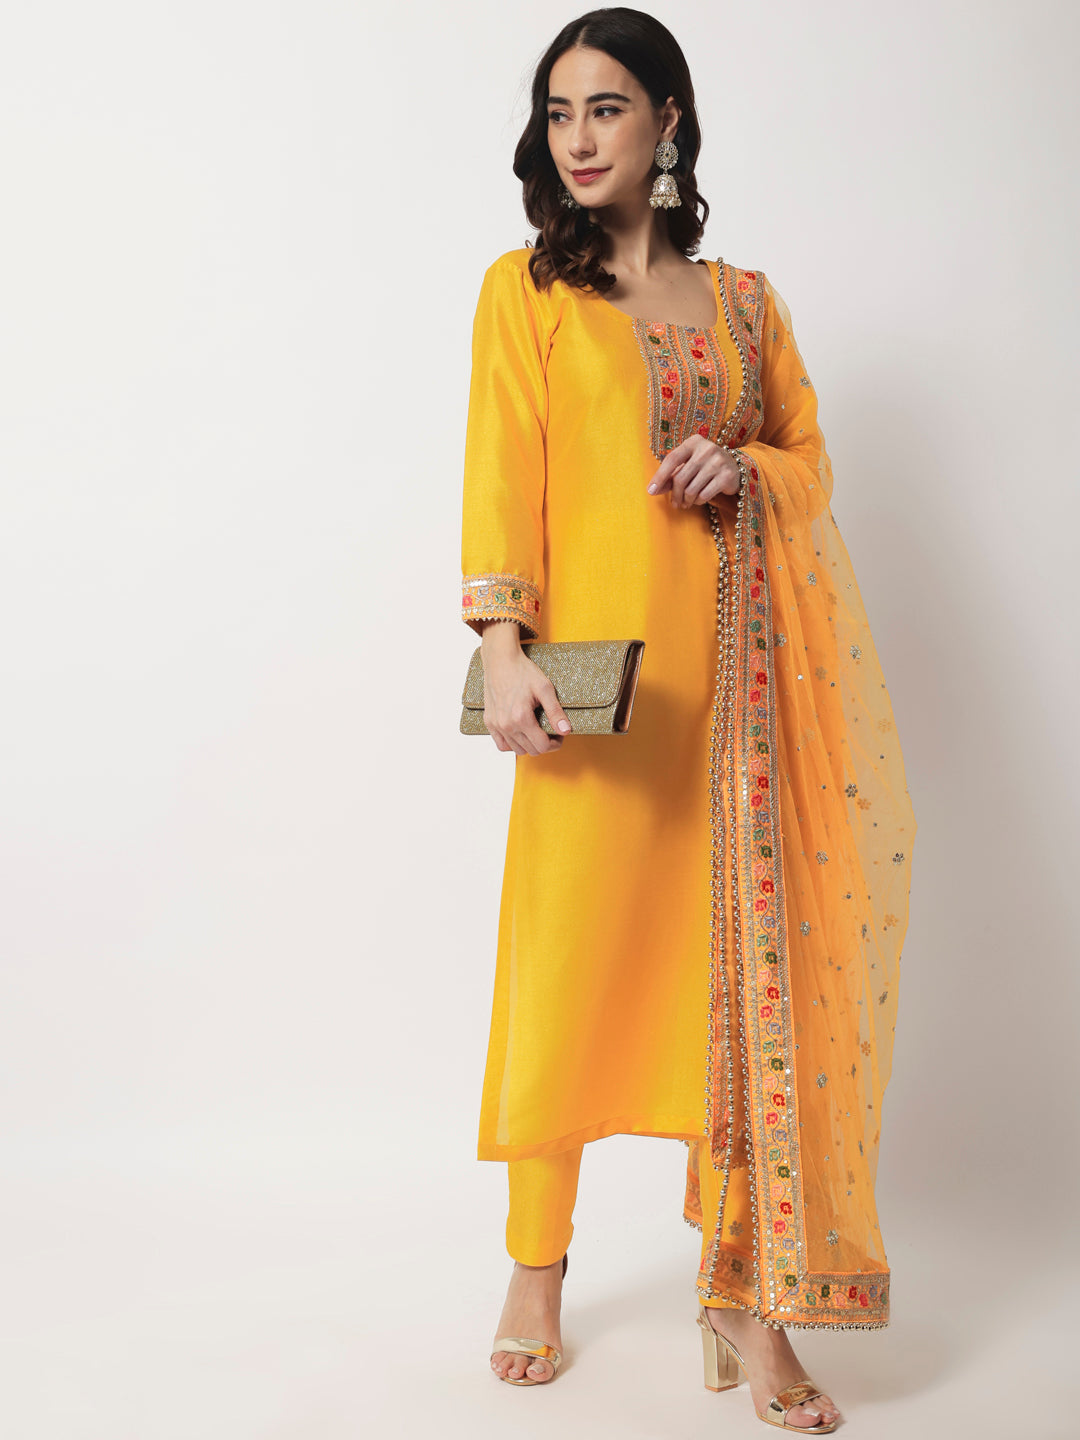 Women Embroidered Cotton Viscose Rayon Straight Kurti (Yellow)  KTAGGSU8GFSETXZ4 in Jaipur at best price by Mm Fashion - Justdial